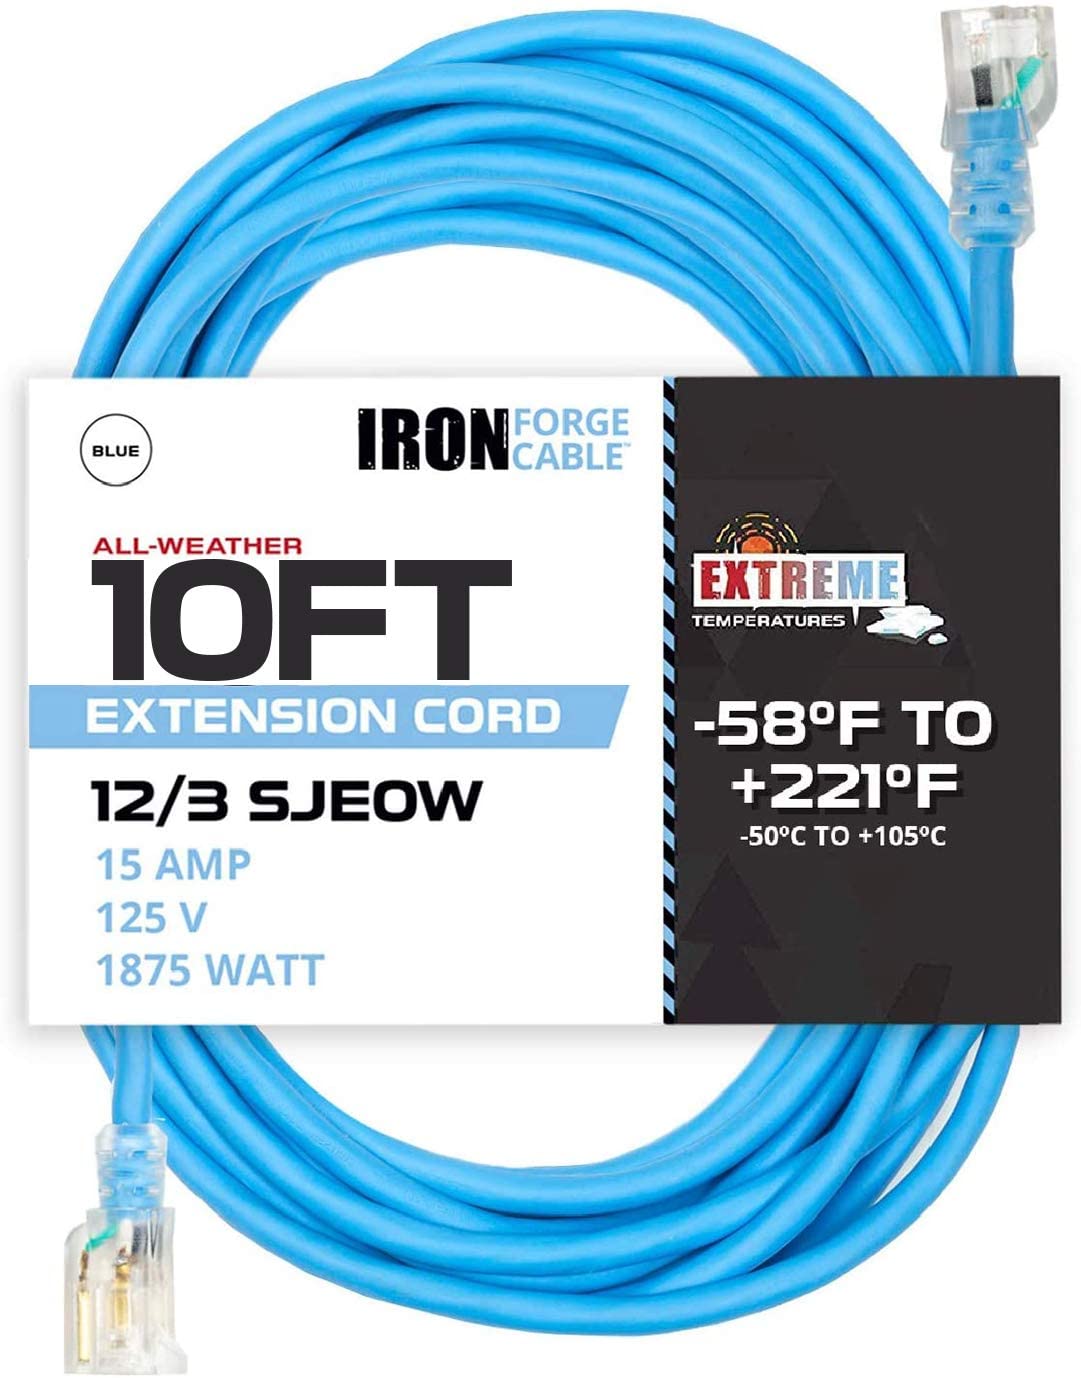 10 Ft All Weather Extension Cord - 12 Gauge- Blue